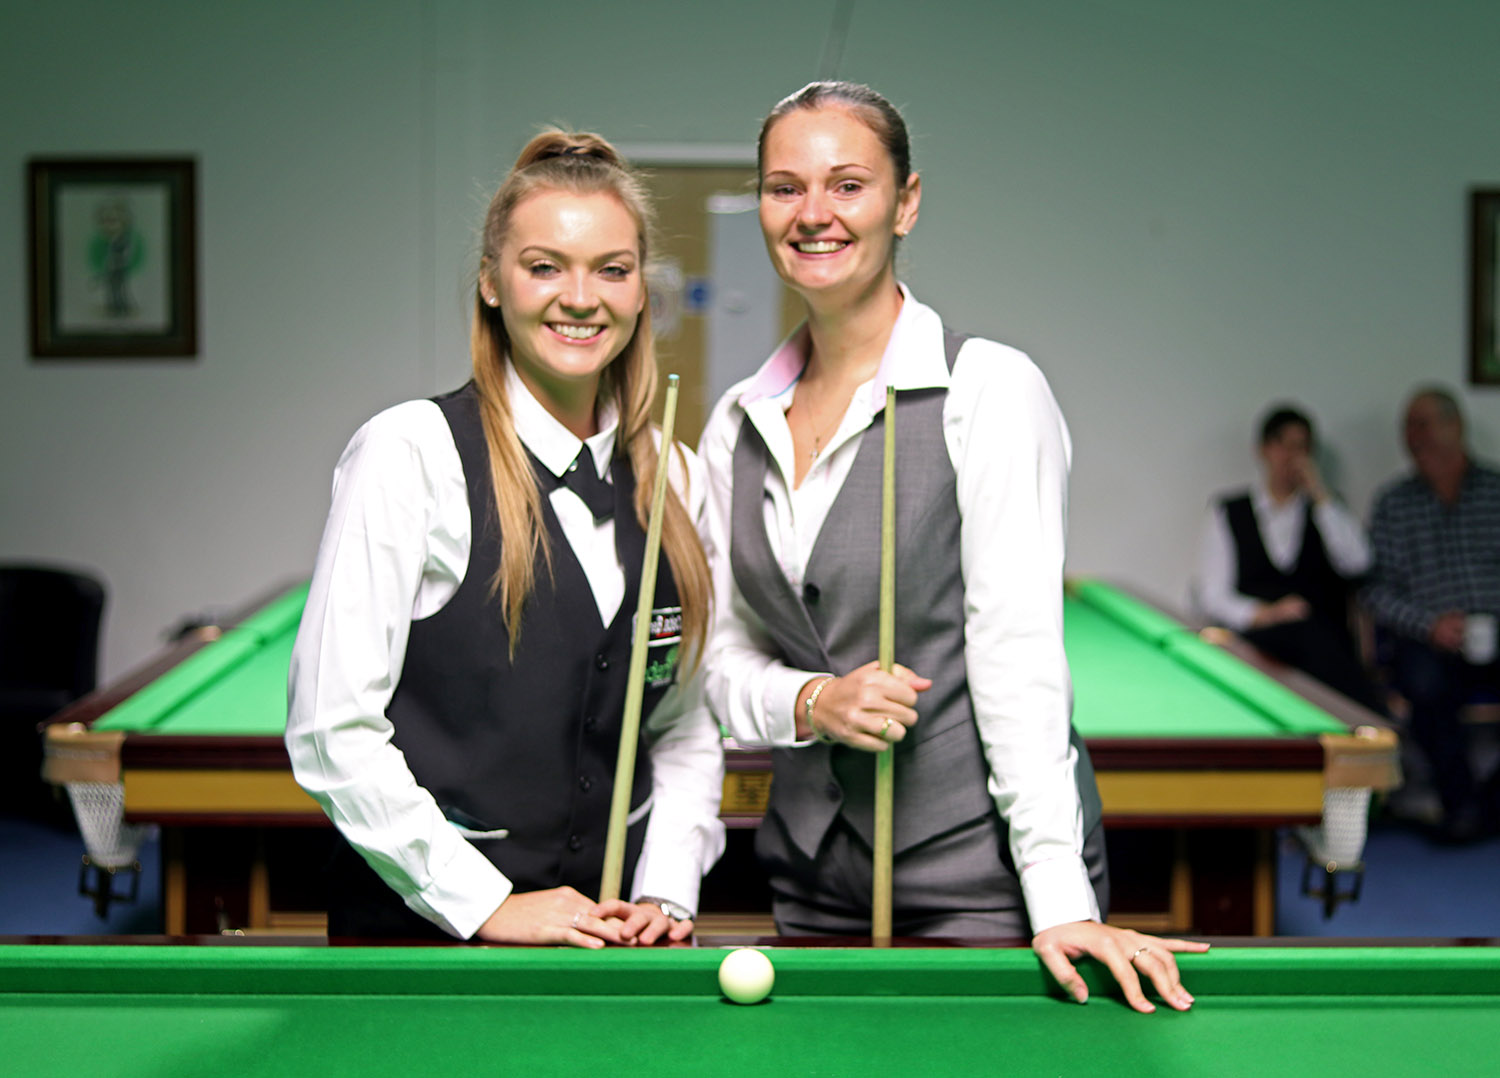 Women to Compete at Snooker Shoot Out